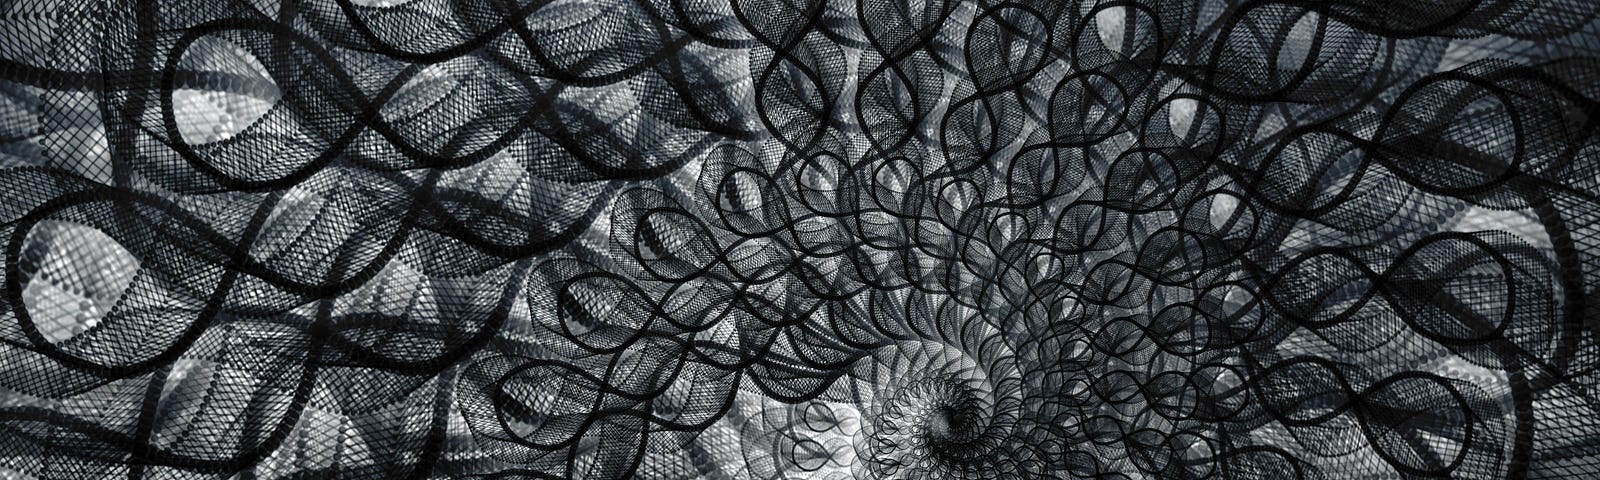 complicated wire mesh spiral pattern (semantic satiation)